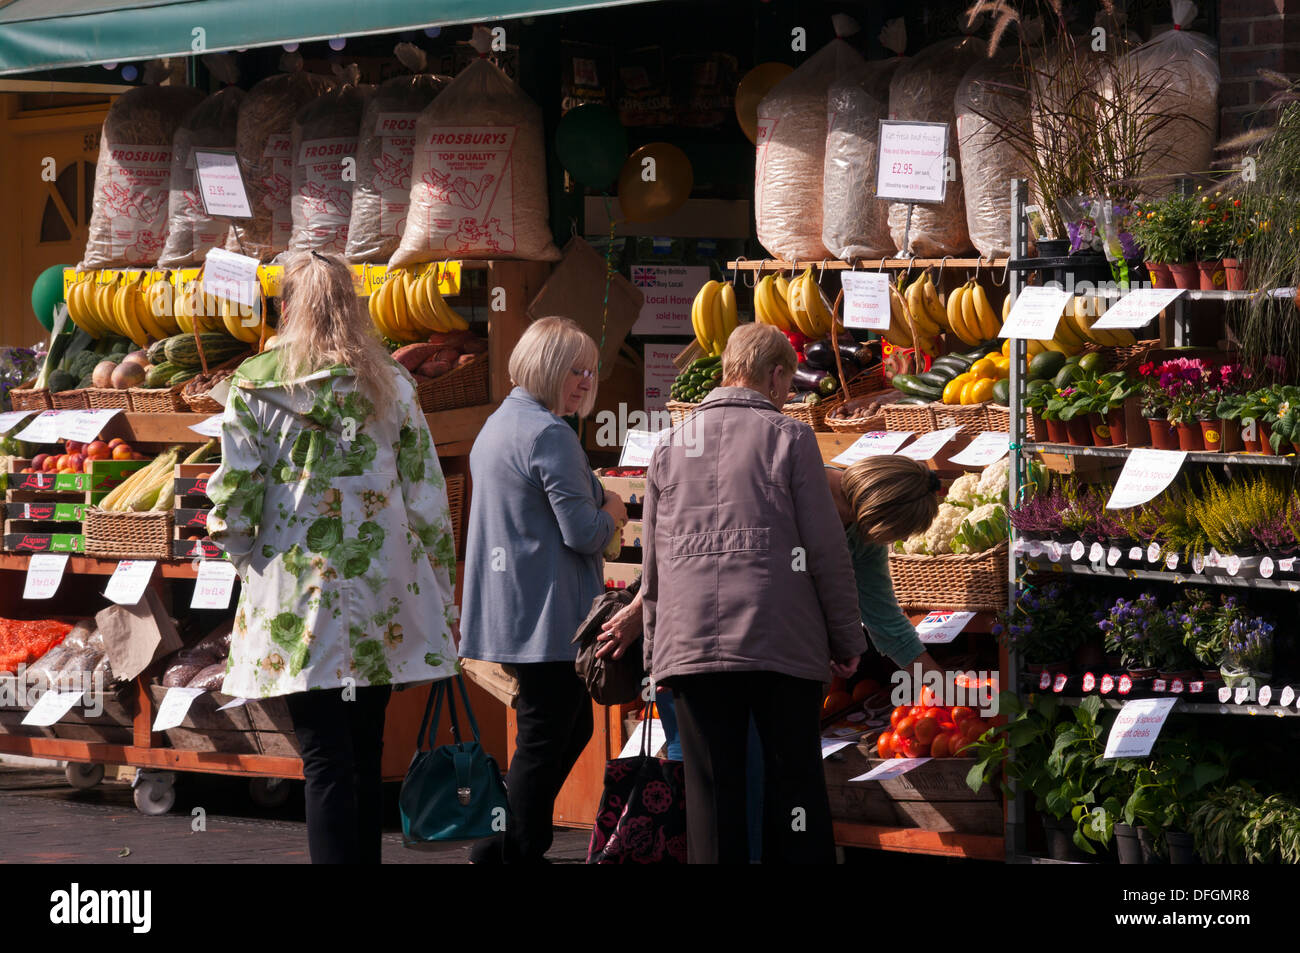 Customers Browsing Outside A greengrocers Fruit and Veg Shop Display UK Stock Photo